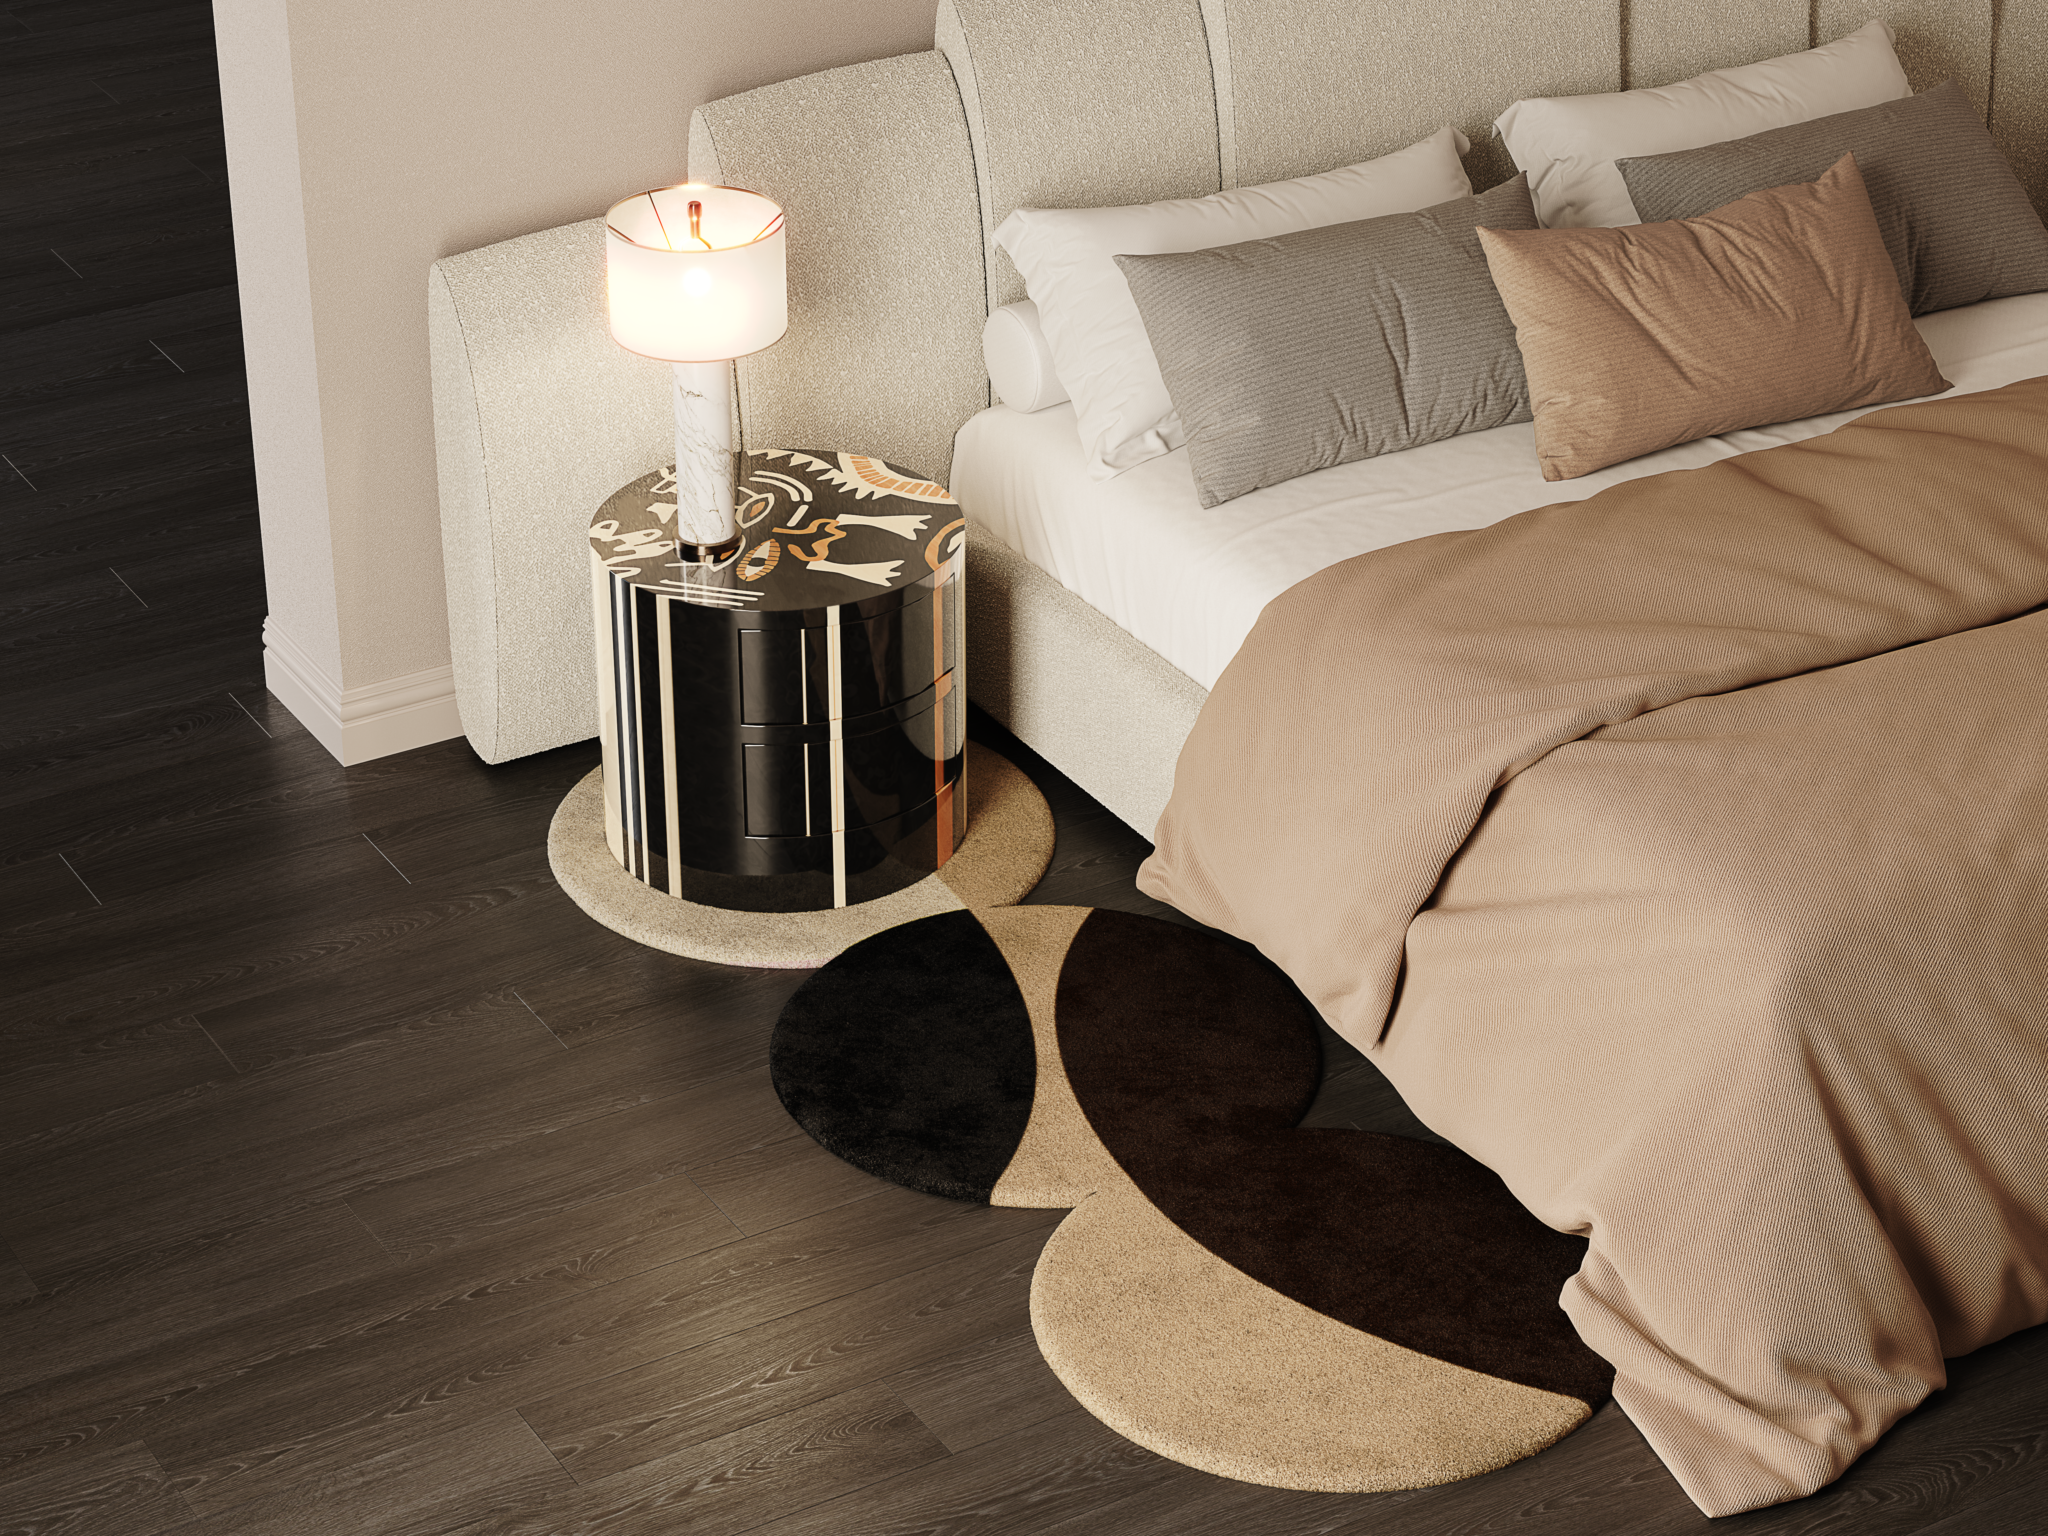 A Modern Design Bedroom With A Bedside Table In Marquetry And Bed With Earth Tones